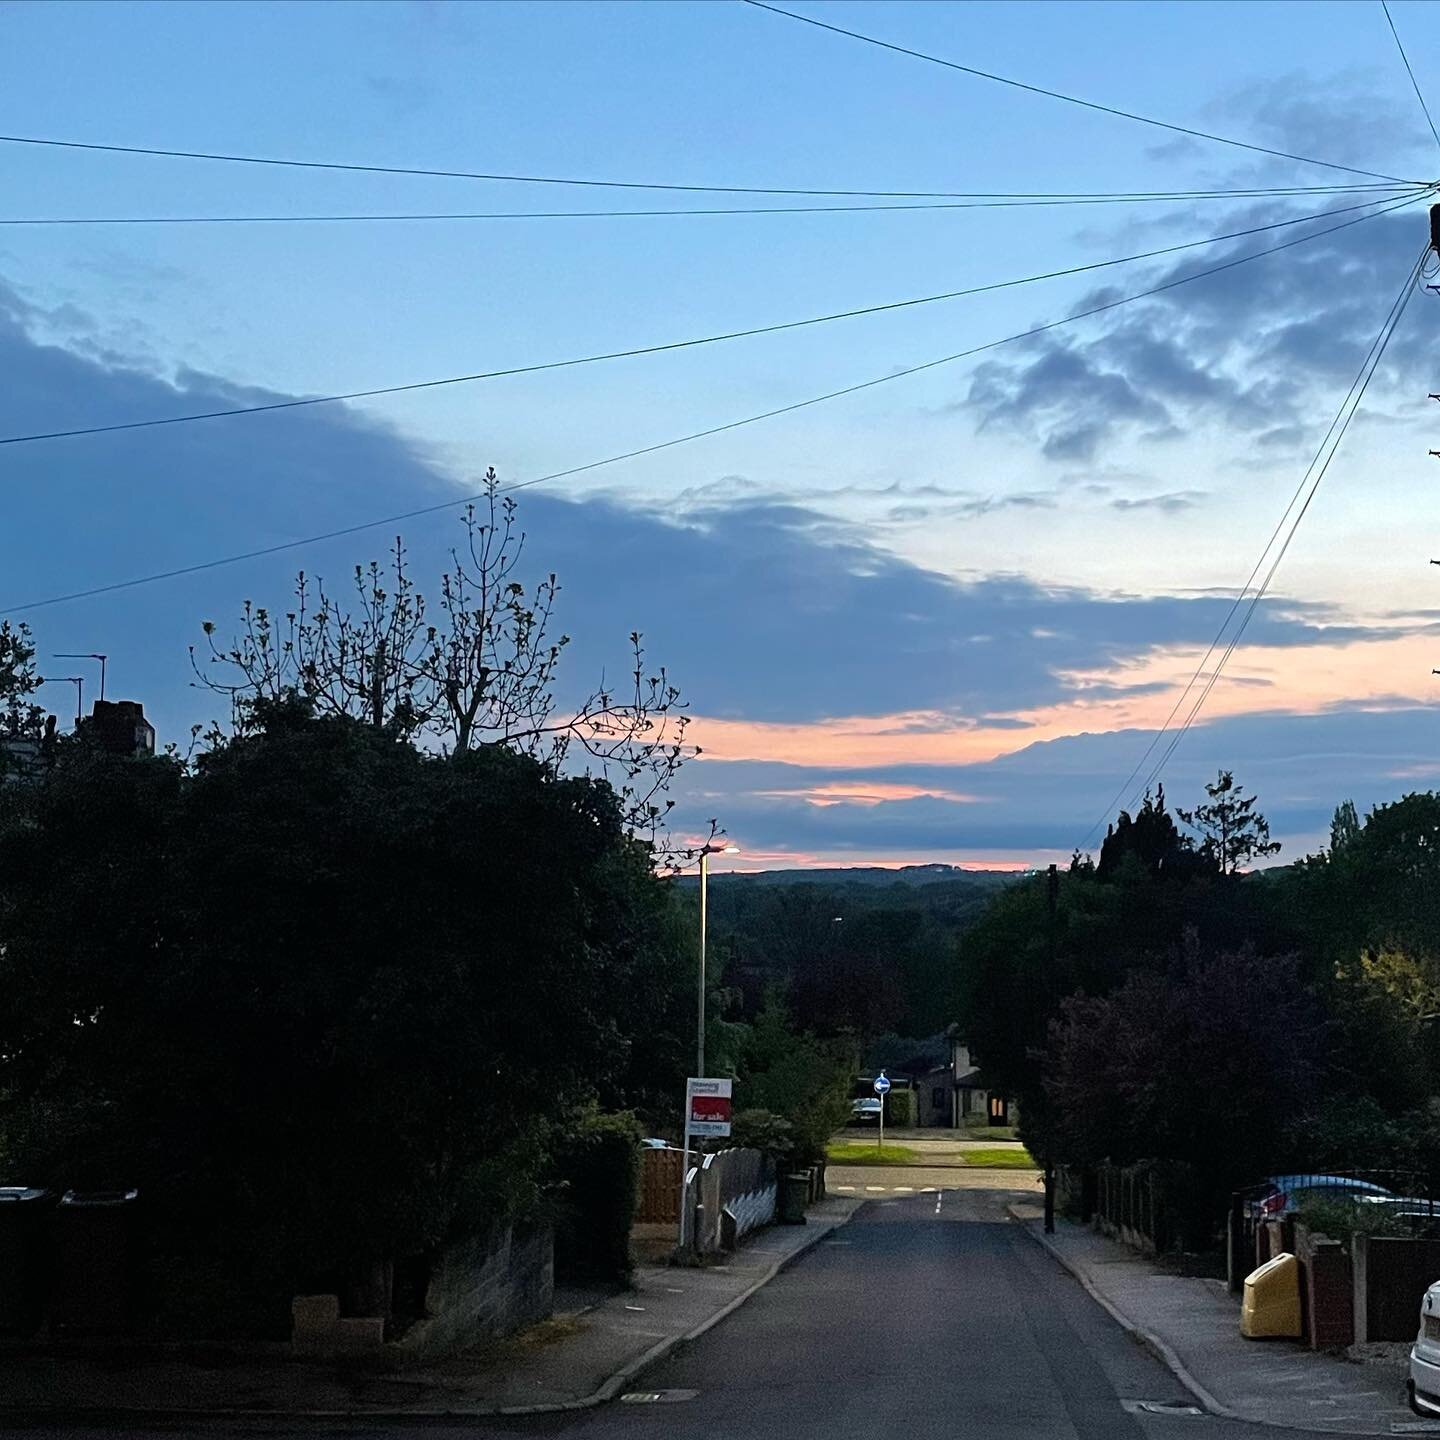 The first time I&rsquo;ve had to post tonight.

Walking home after running my jesmonite workshop - tired after an emotional day. 

Red sky at night &hellip;. looking forward to a bright day tomorrow 

#redskyatnight #chapelallerton #workshop #learnlo